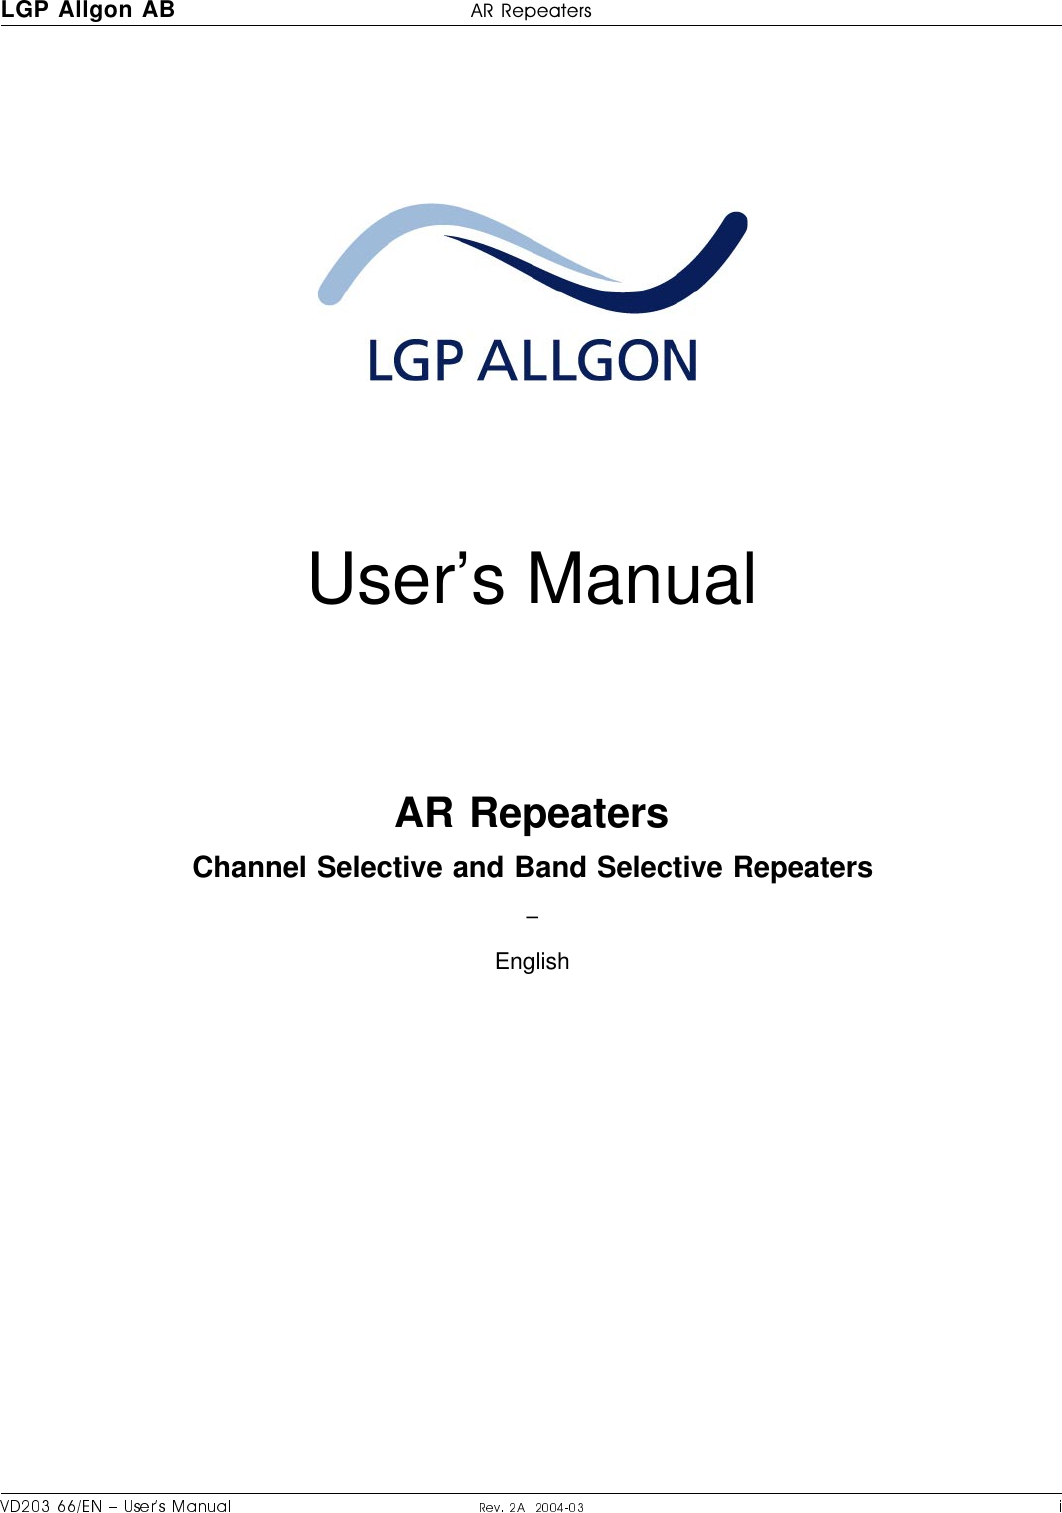 User’s ManualAR RepeatersChannel Selective and Band Selective Repeaters–EnglishLGP Allgon AB H|H#H